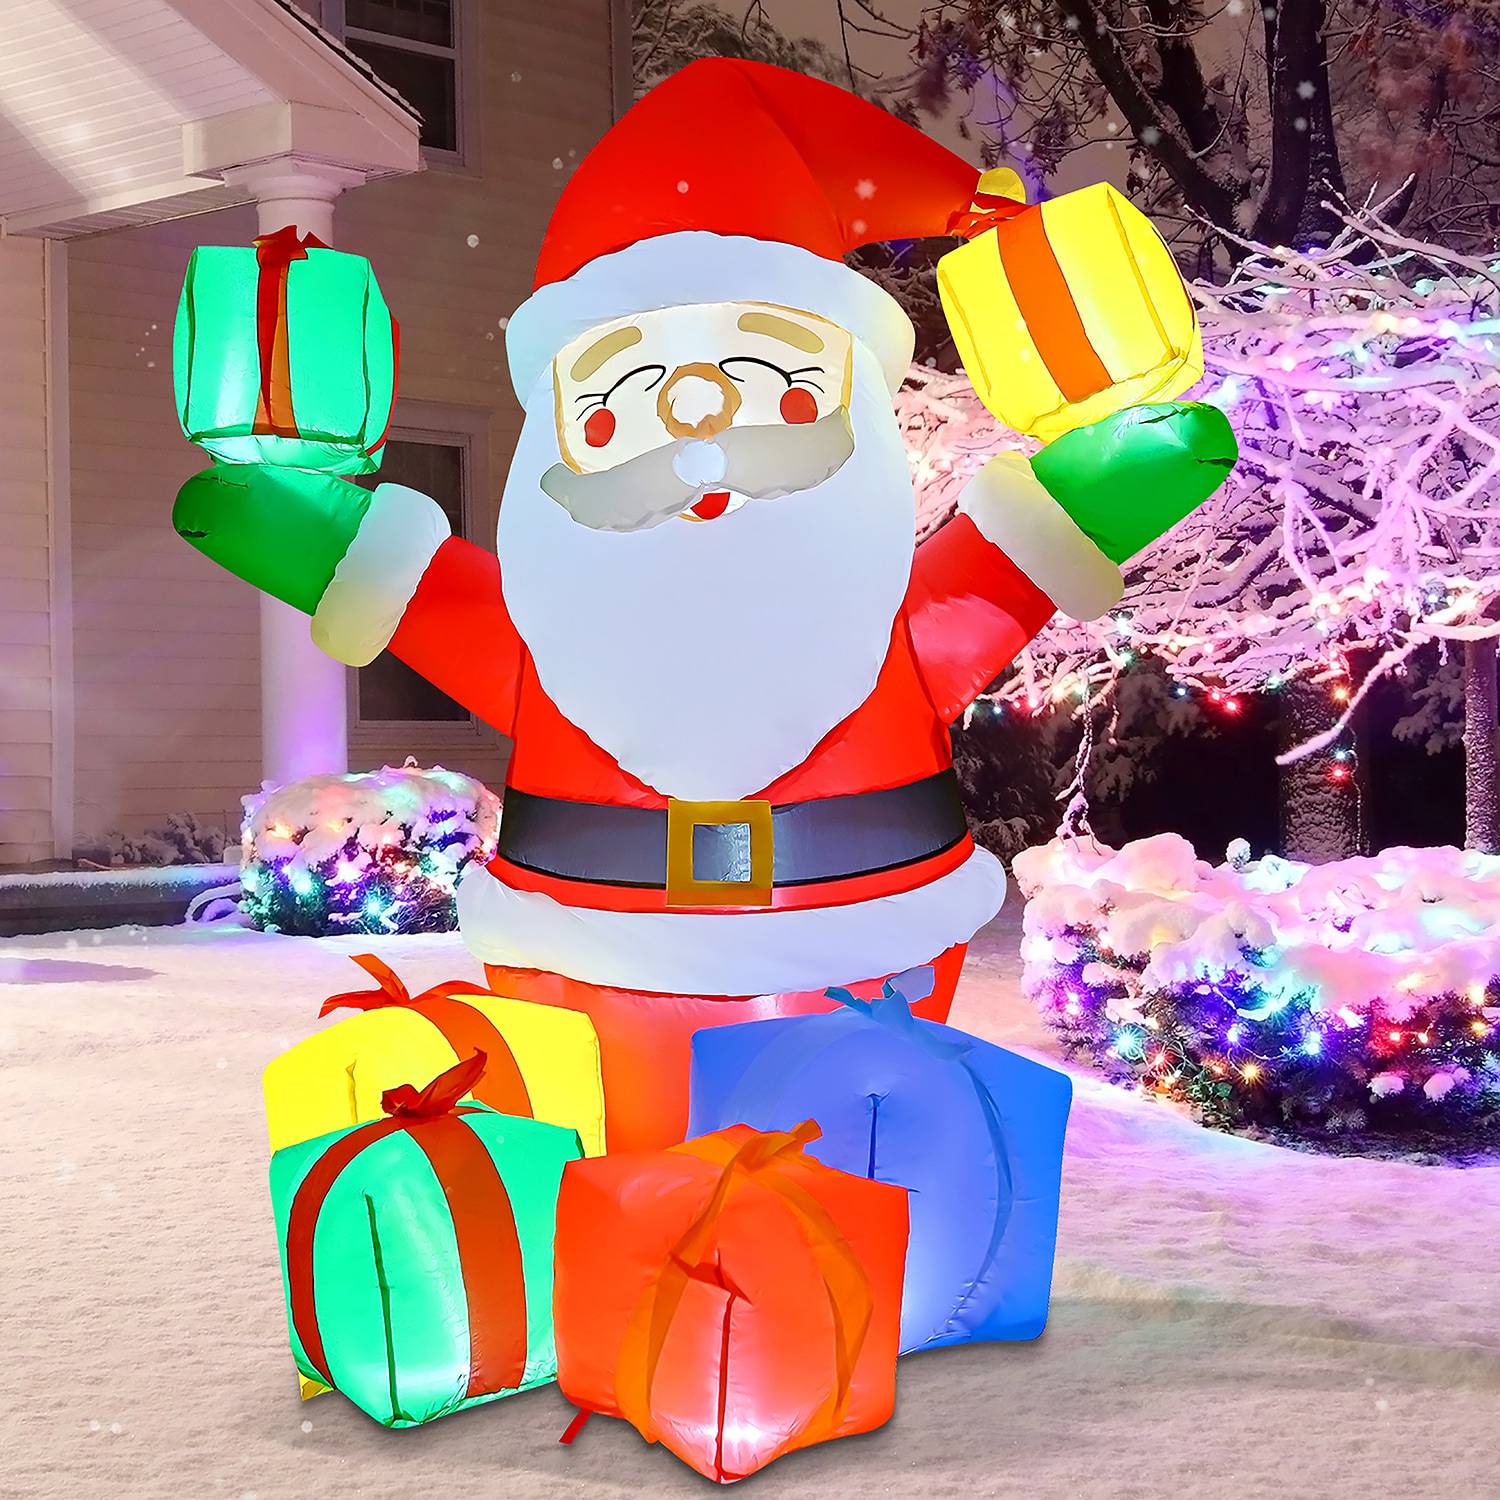  BLOWOUT FUN 8ft Inflatable Christmas Santa Claus on a Fishing  Boat Lighted Blow Up Decortion, LED Blow Up Lighted Decor Indoor Outdoor  Holiday Decor : Patio, Lawn & Garden